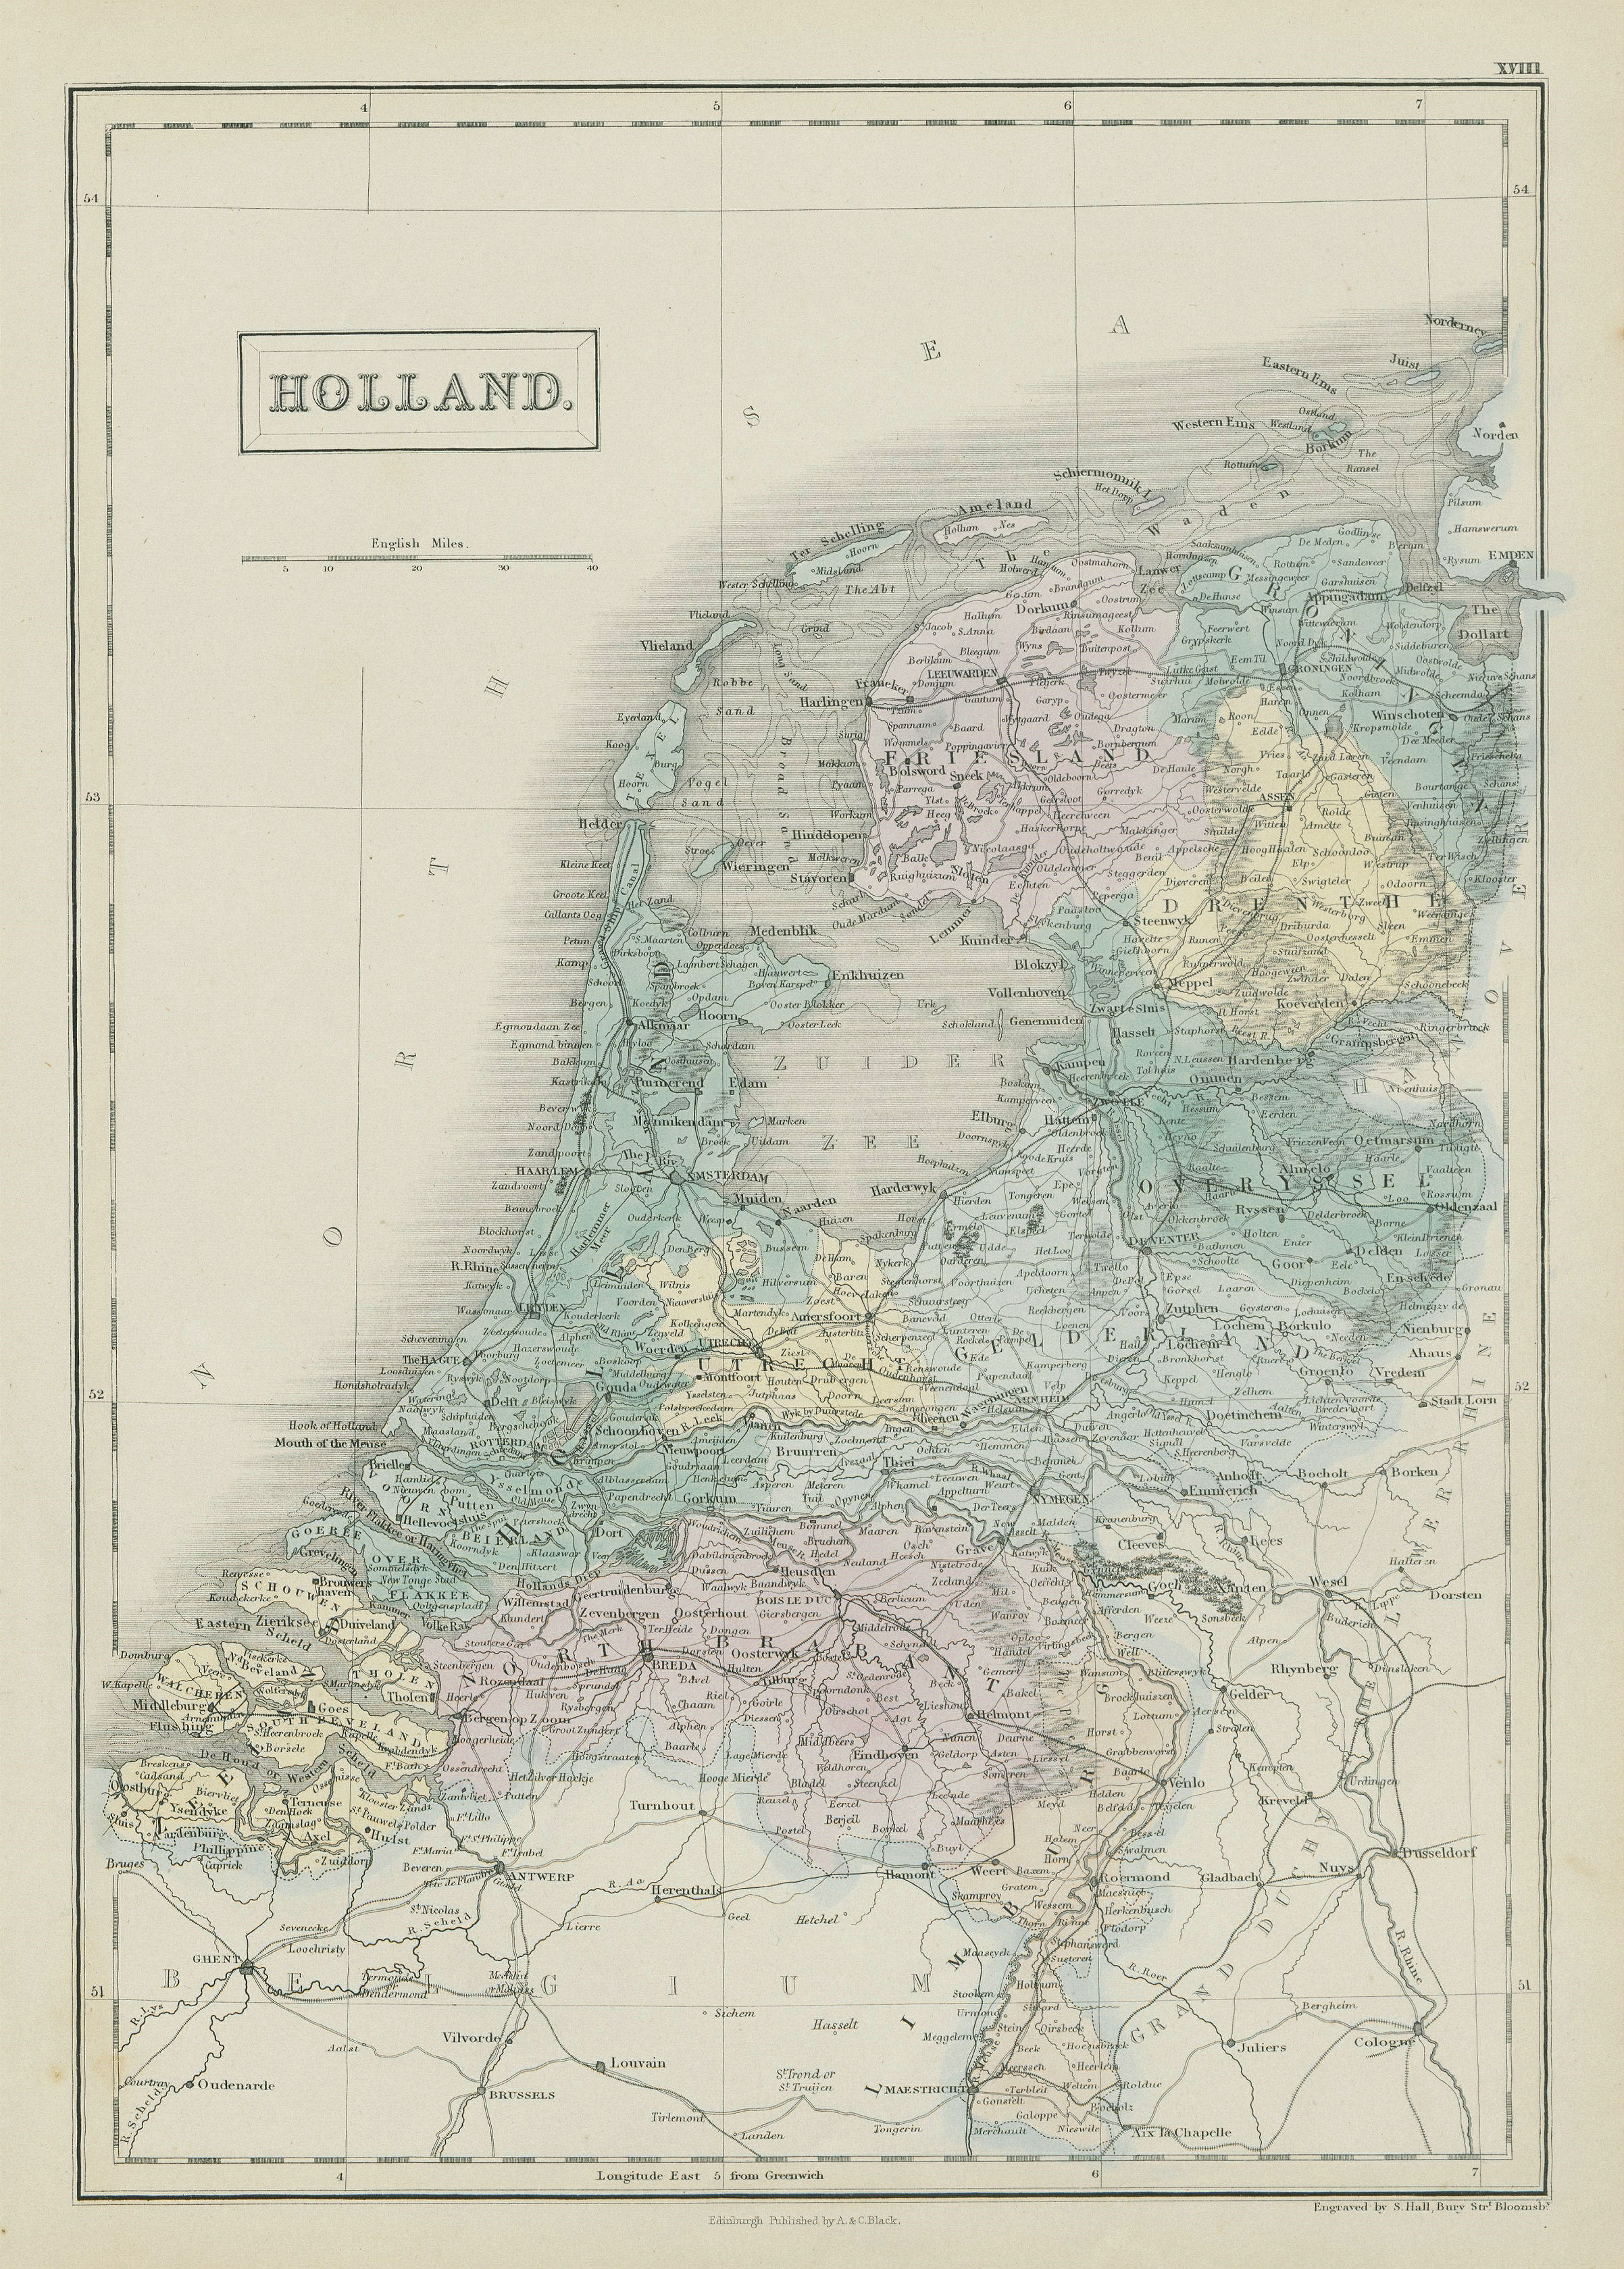 Associate Product "Holland". Netherlands. Railways. SIDNEY HALL 1856 old antique map plan chart